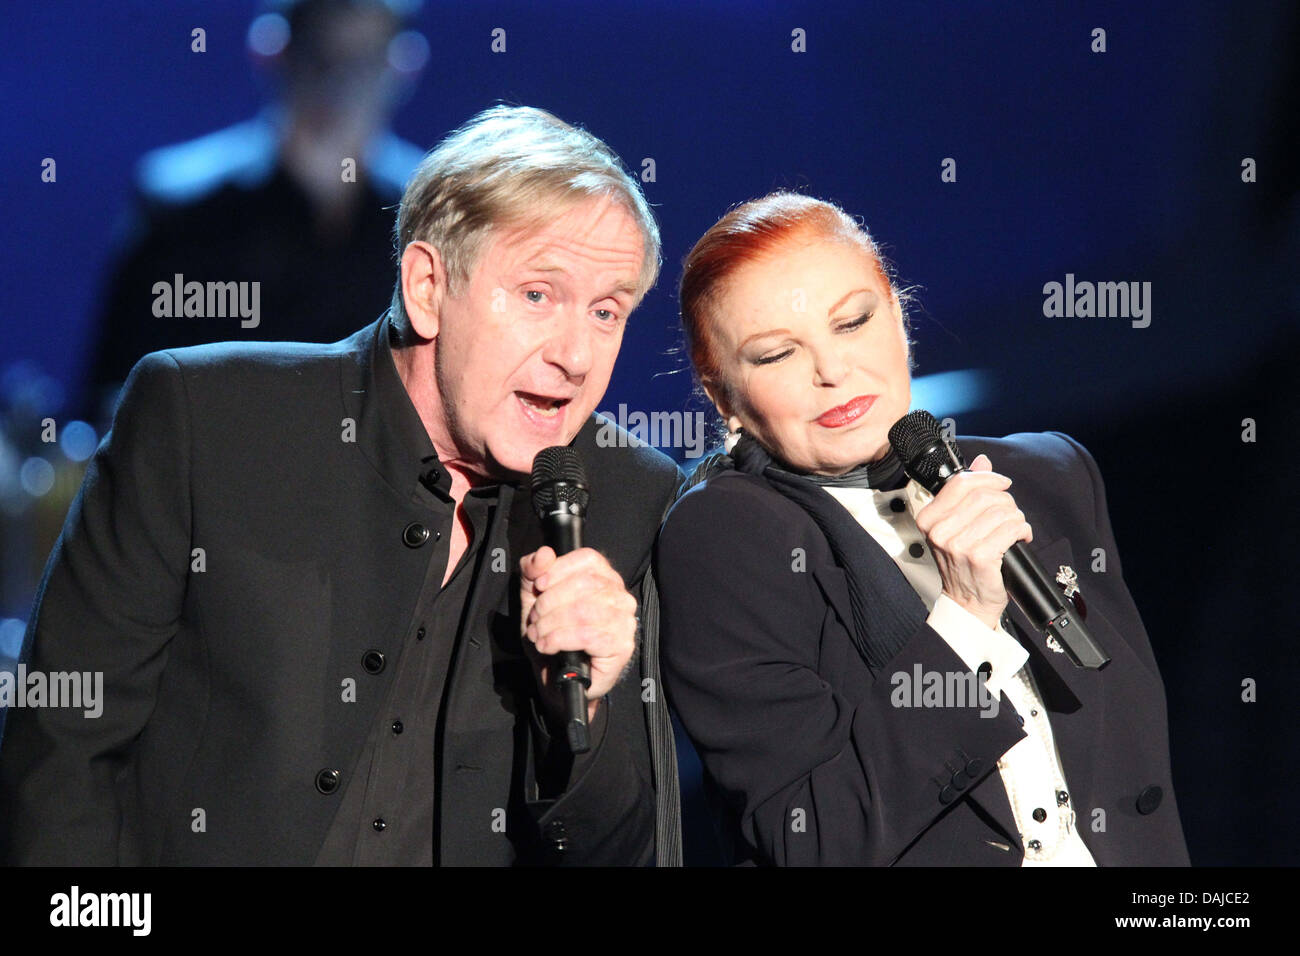 Swiss song writer Stephan Sulke (L) and Italian singer Milva perform during the German television show 'Willkommen bei Carmen Nebel' ('Welcome to Carmen Nebel's show') aired by the German public tv broadcaster ZDF in Klagenfurt, Austria, 2 April 2011. Numerous German and international stars perform at popular German variety and entertainment show. Photo:  Stock Photo